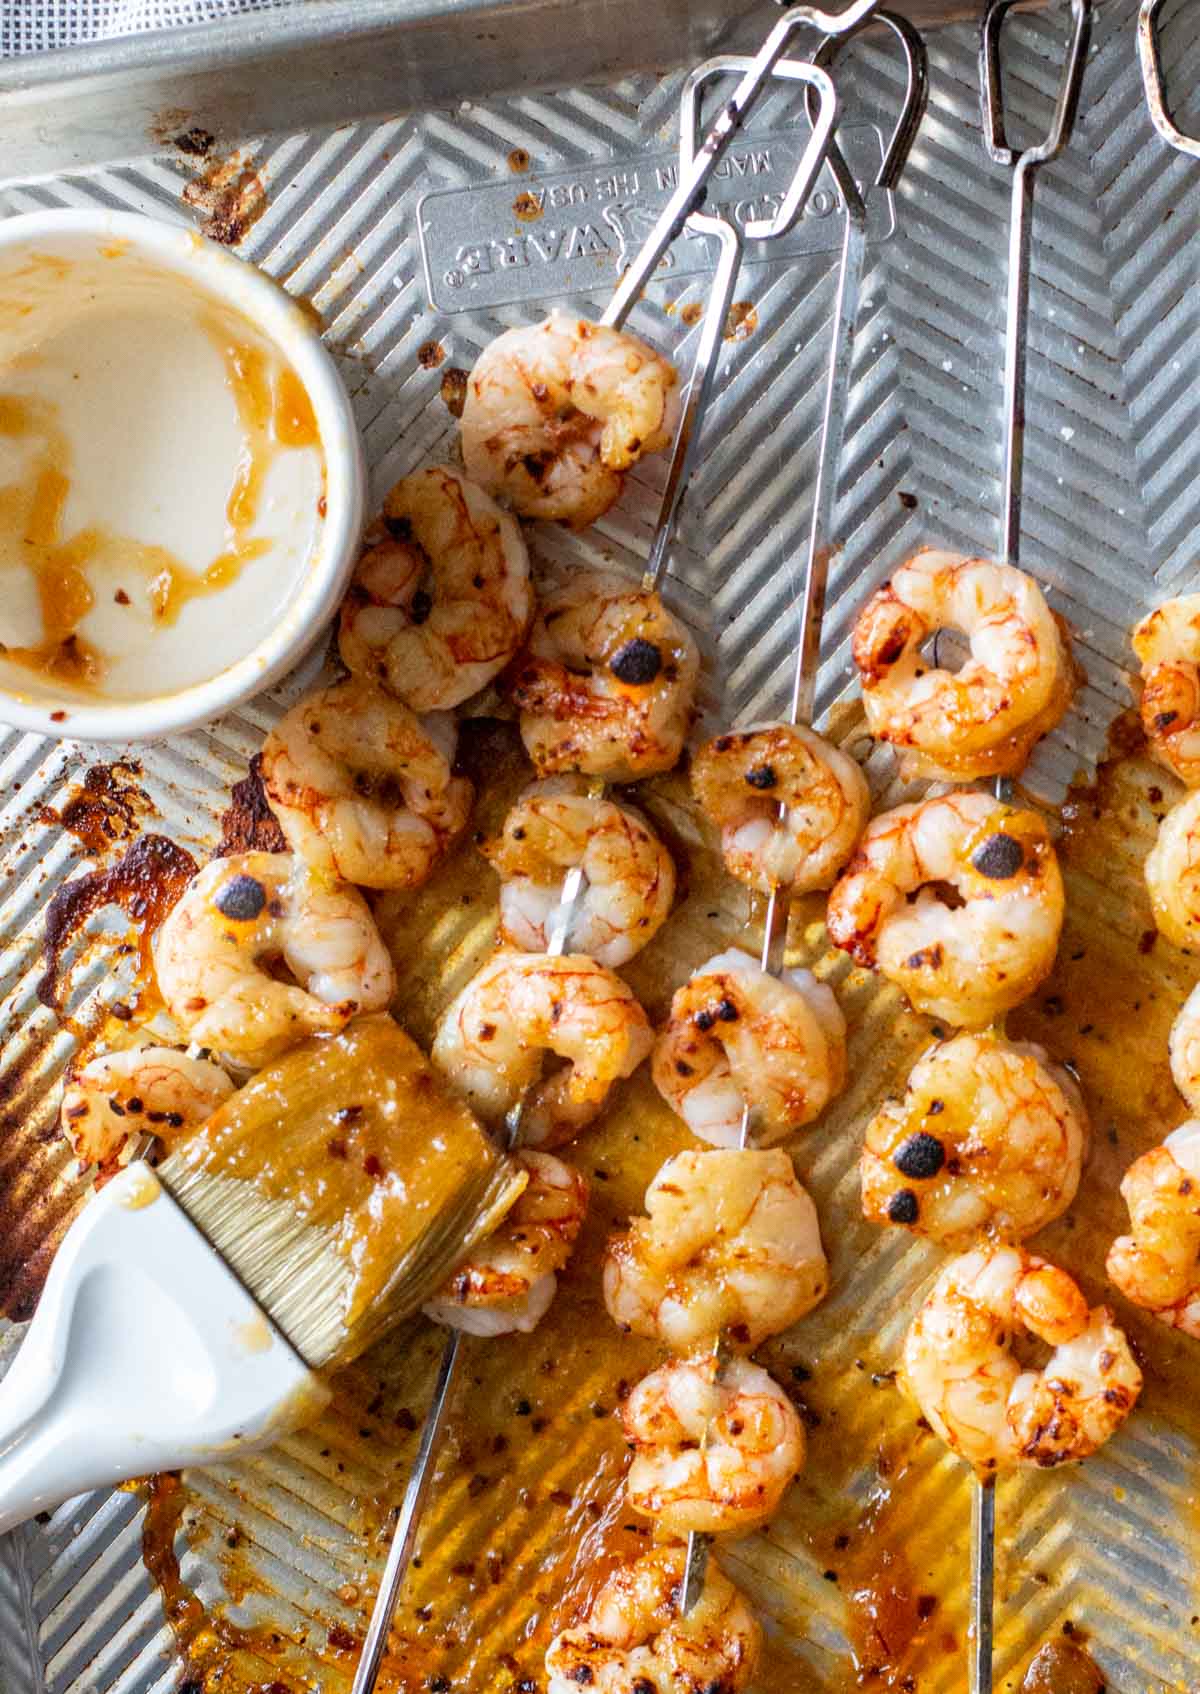 Shrimp skewers on a sheet pan that have been broiled and glazed.